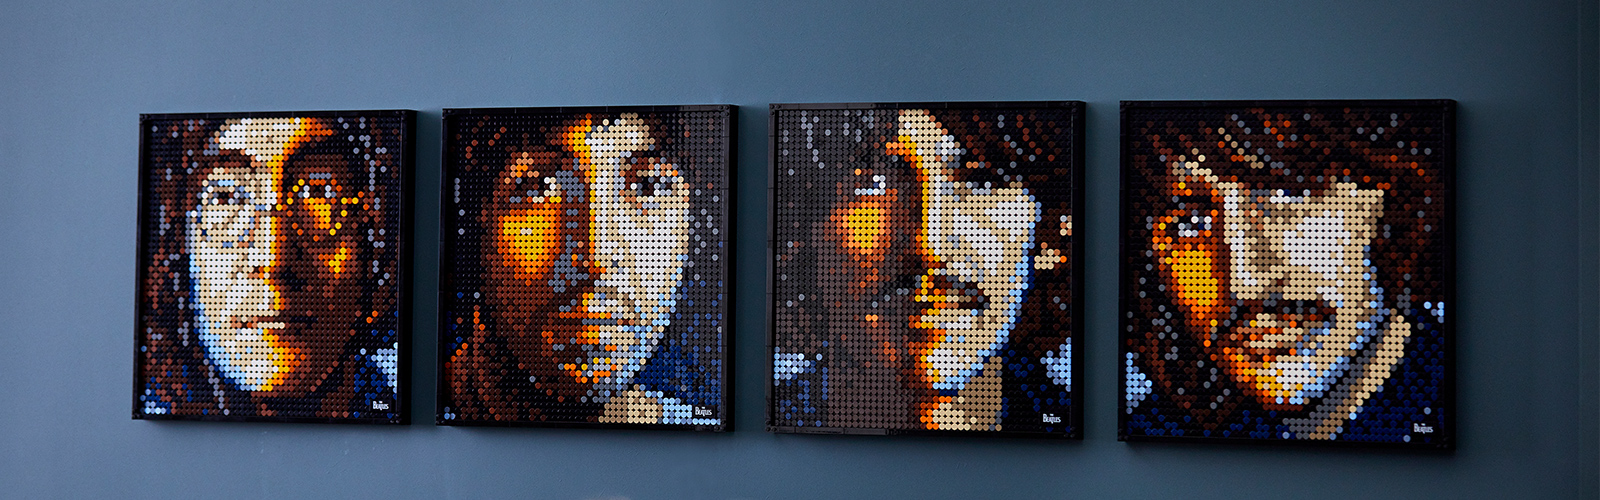 How we made The Beatles out of LEGO® bricks | Official LEGO Shop